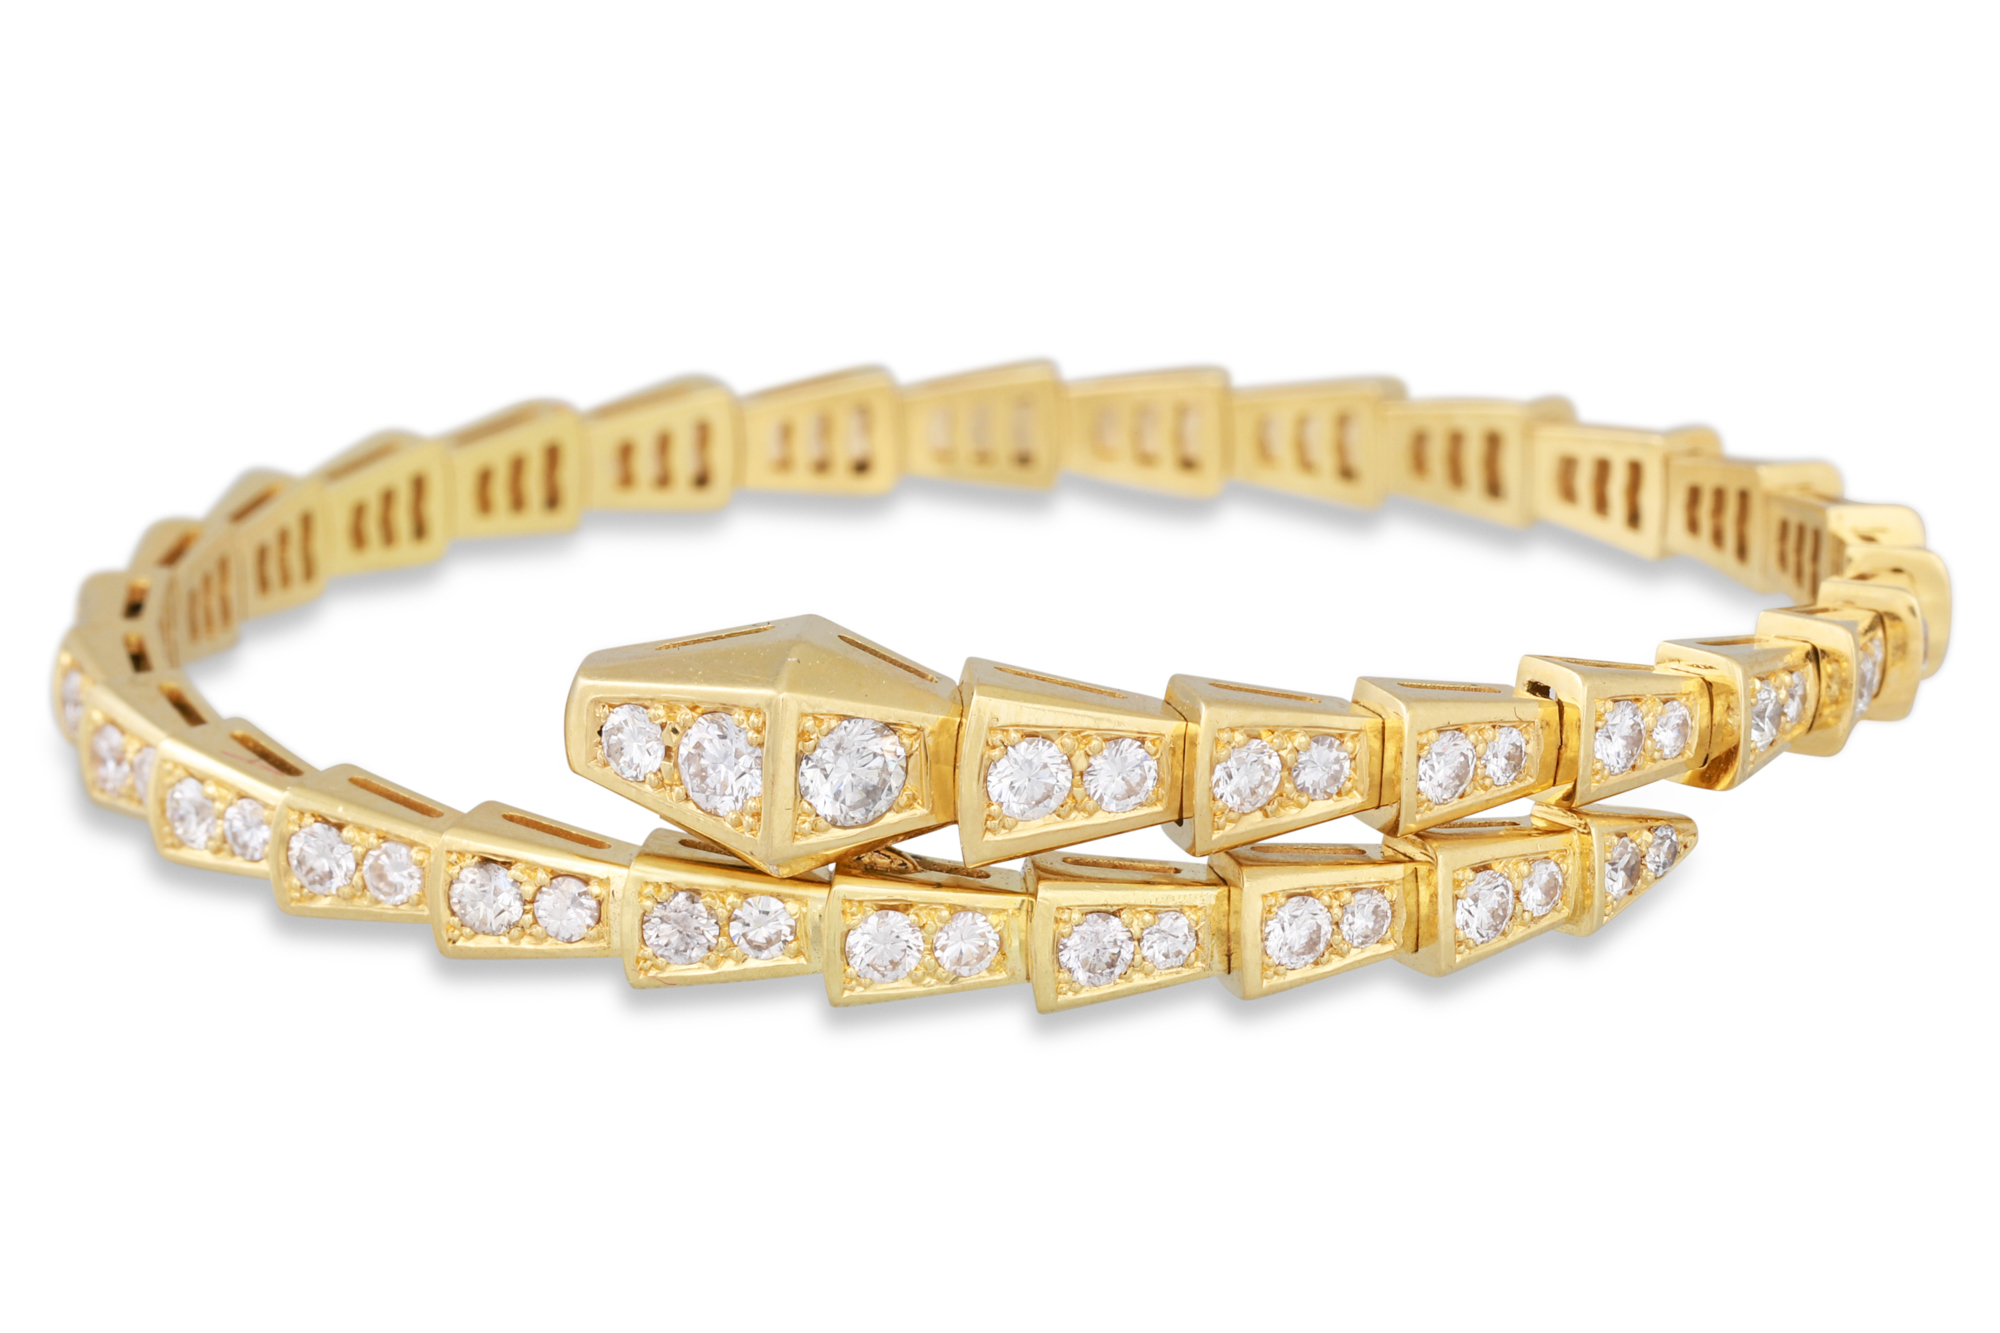 A DIAMOND SET BANGLE, modelled as a snake, cross over style, mounted in yellow gold. Estimated: